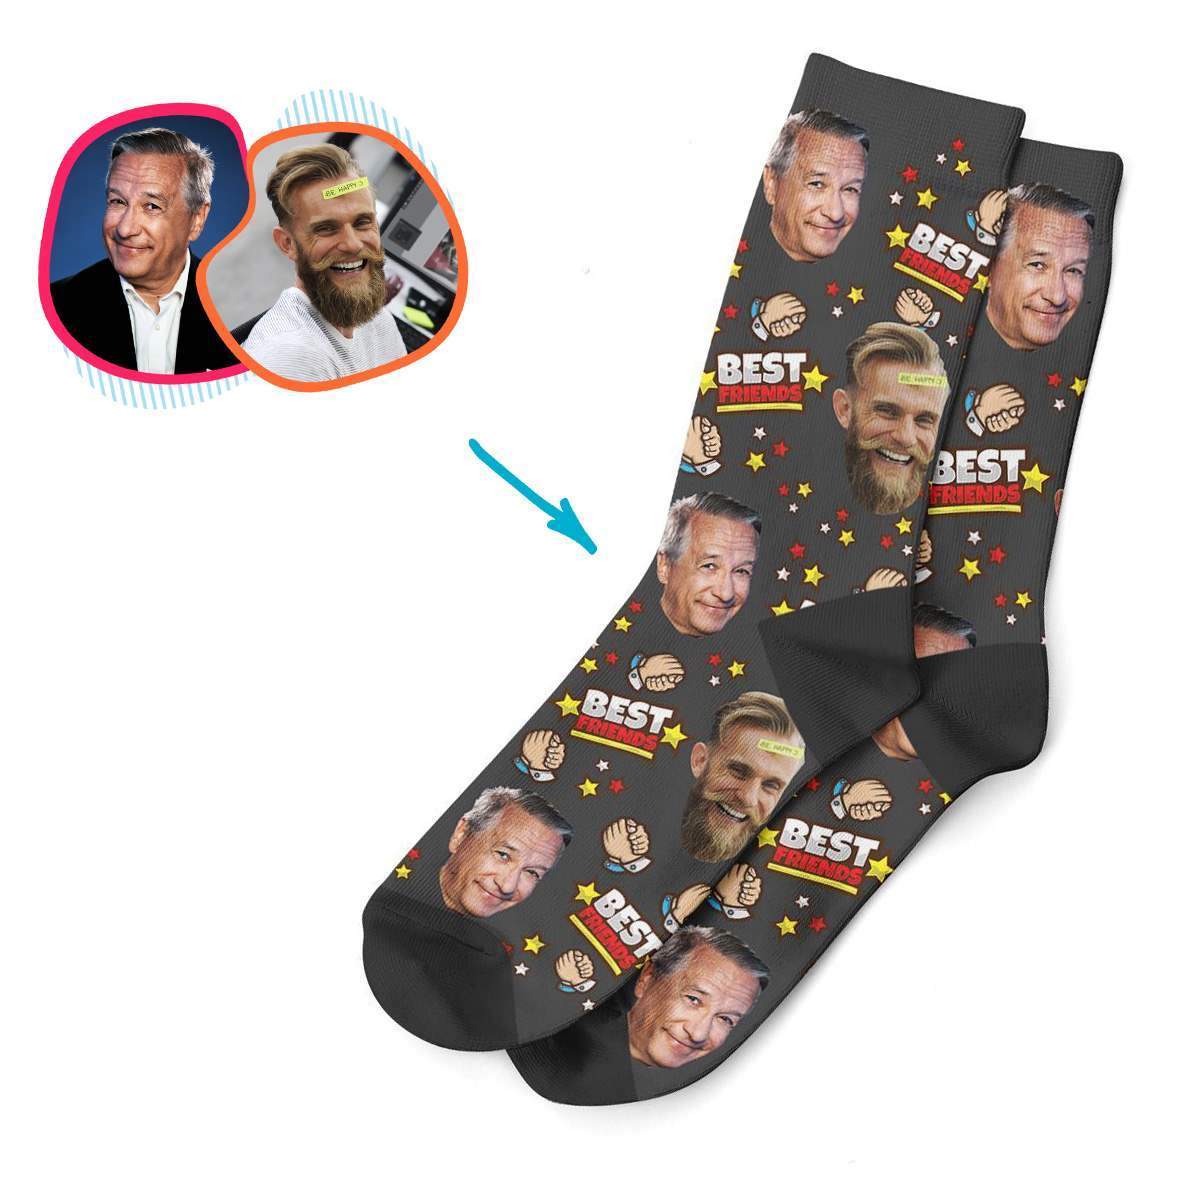 dark Best Friends socks personalized with photo of face printed on them